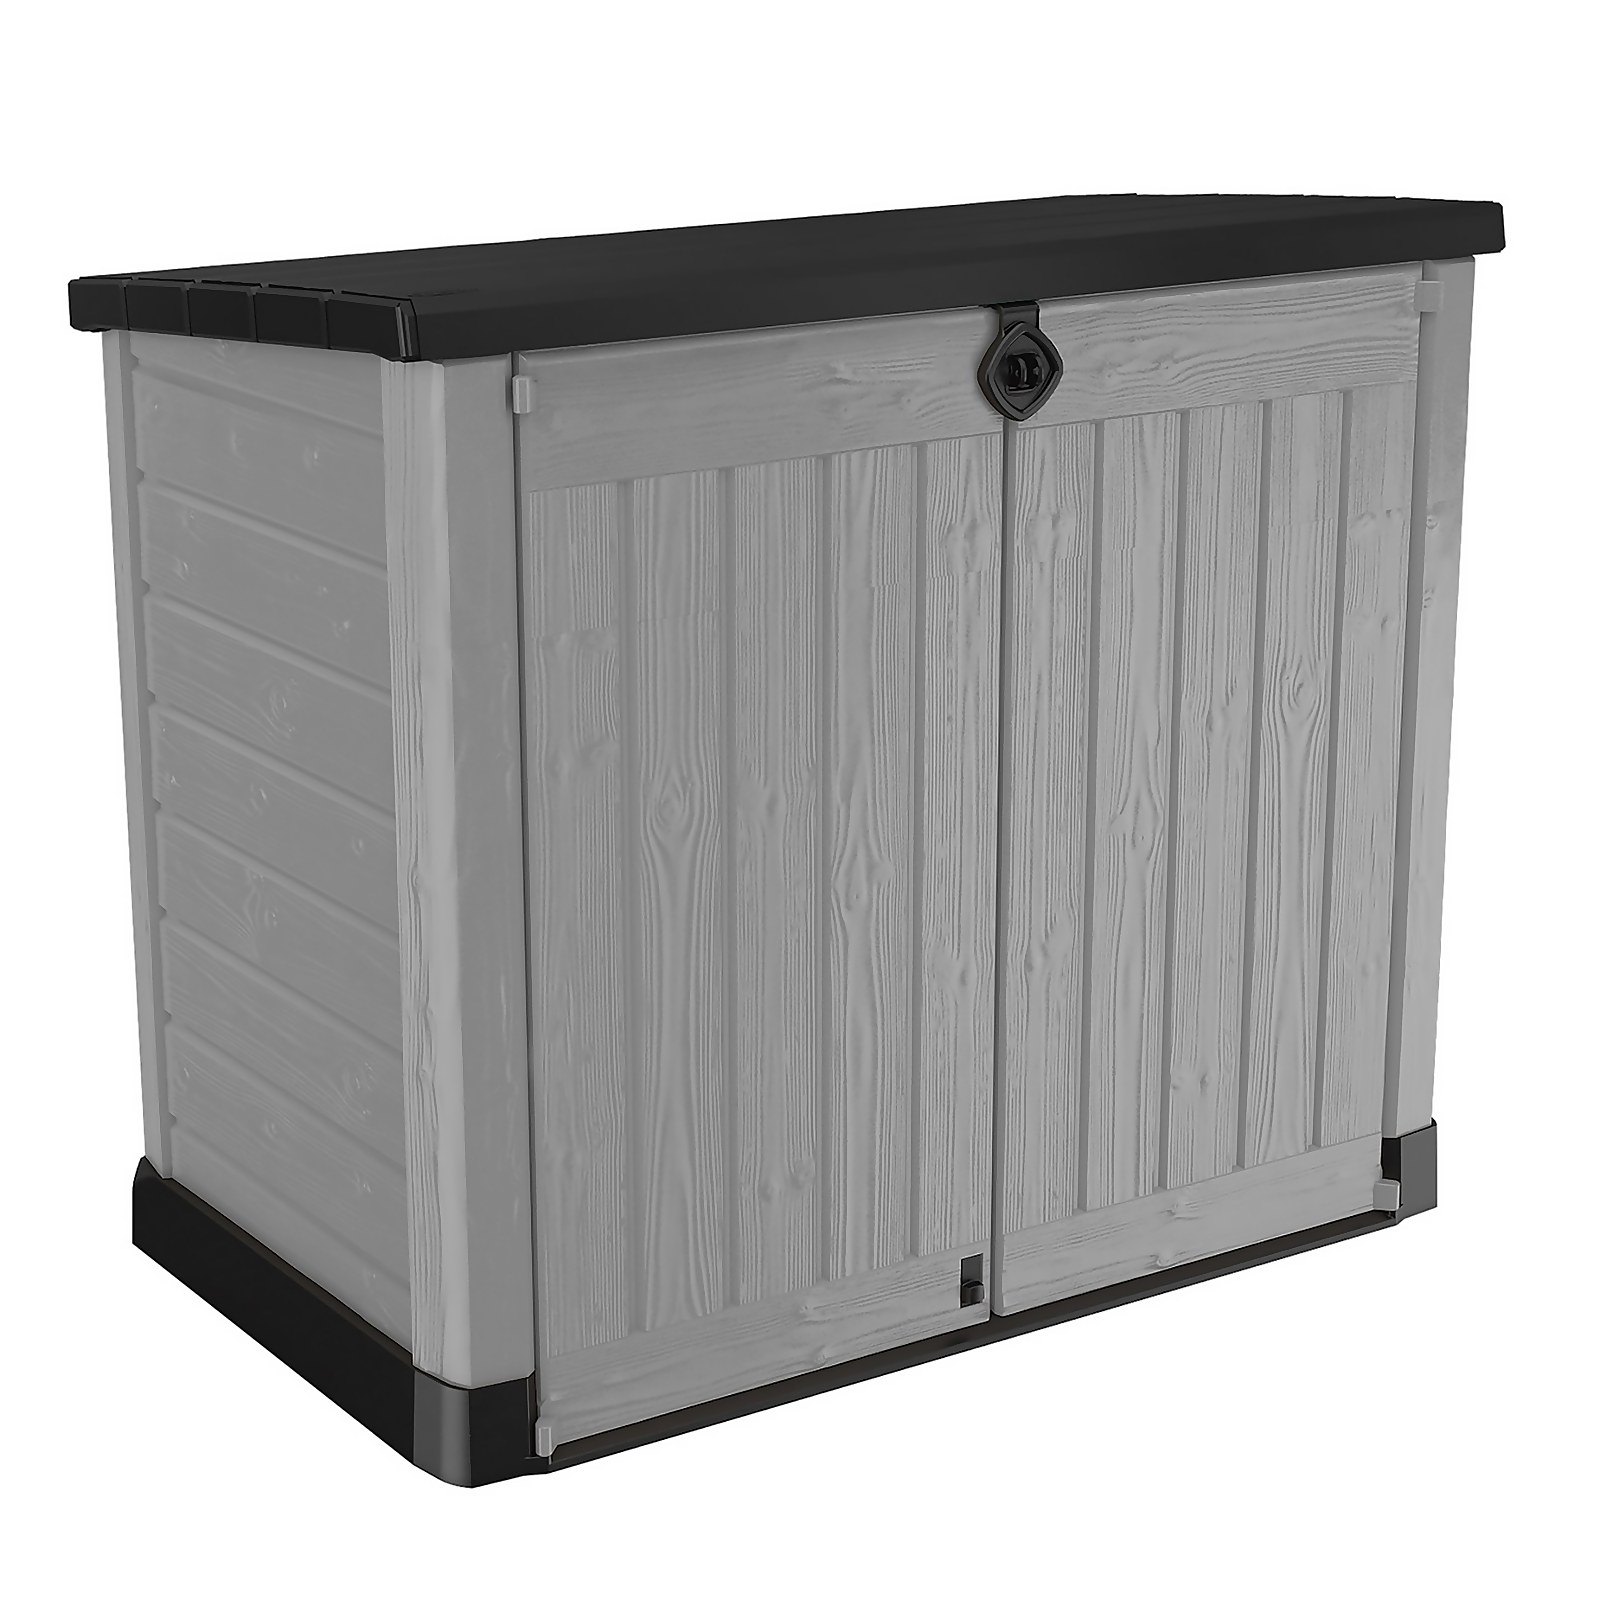 Keter Store It Out Ace Outdoor Garden Storage Shed 1200L - Grey / Graphite